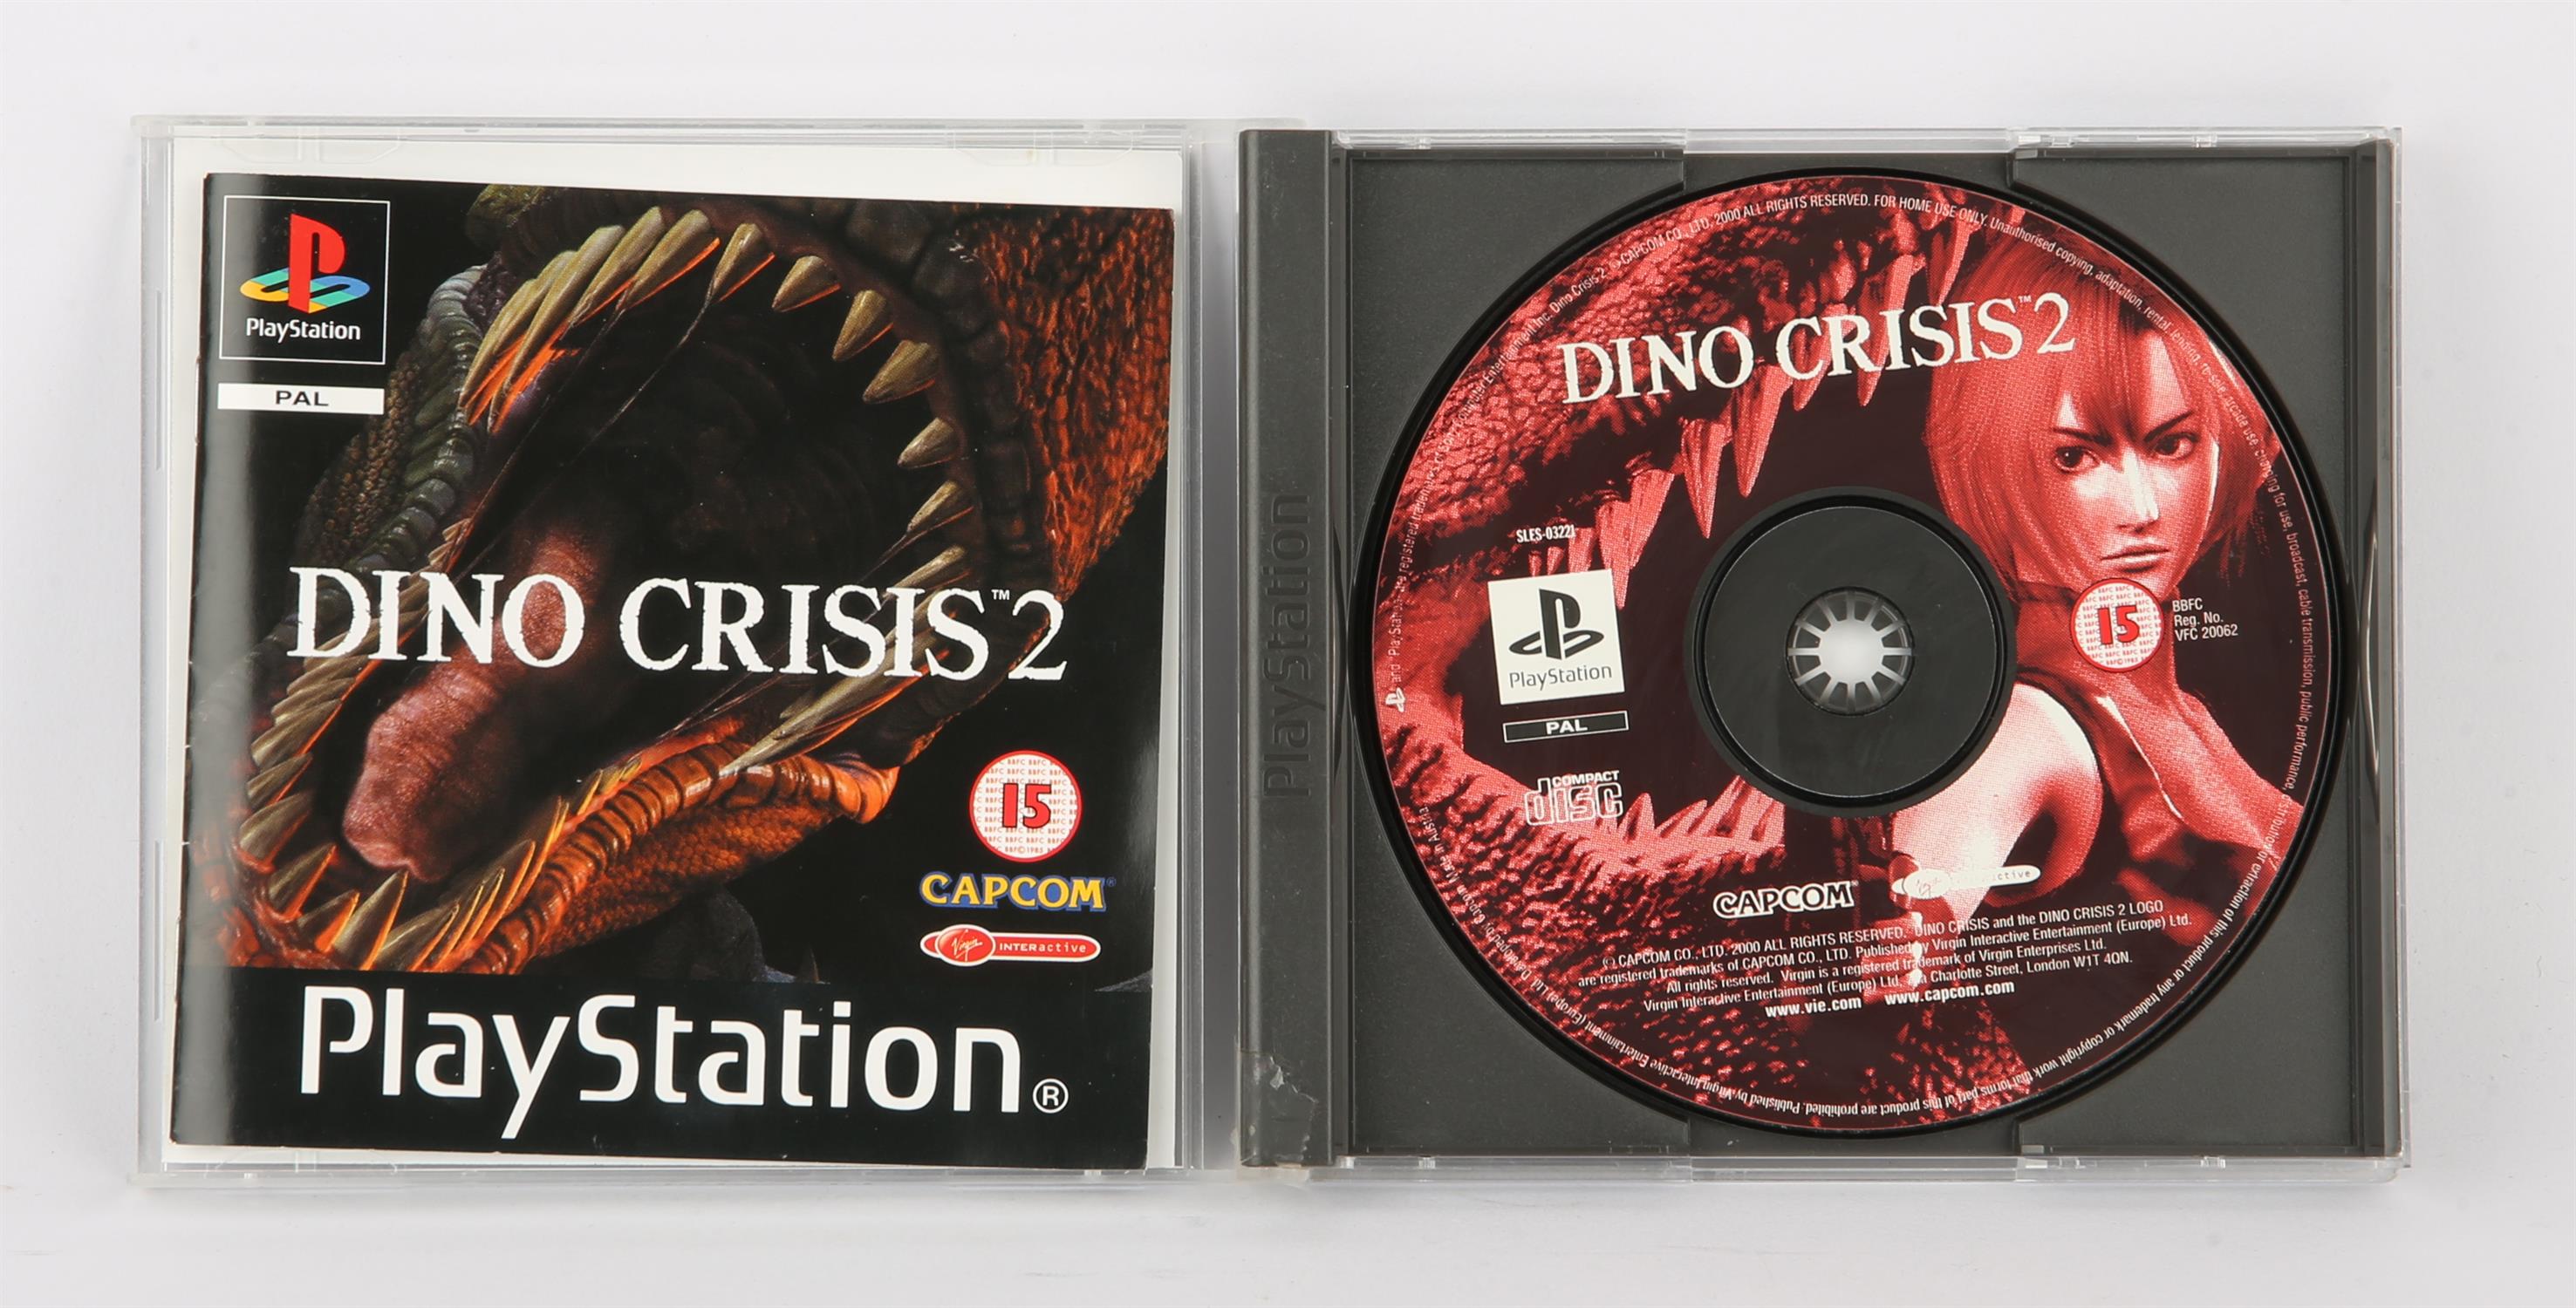 Dino Crisis 2 - Sony PlayStation. This lot contains one of the most beloved survival horror games - Image 2 of 2